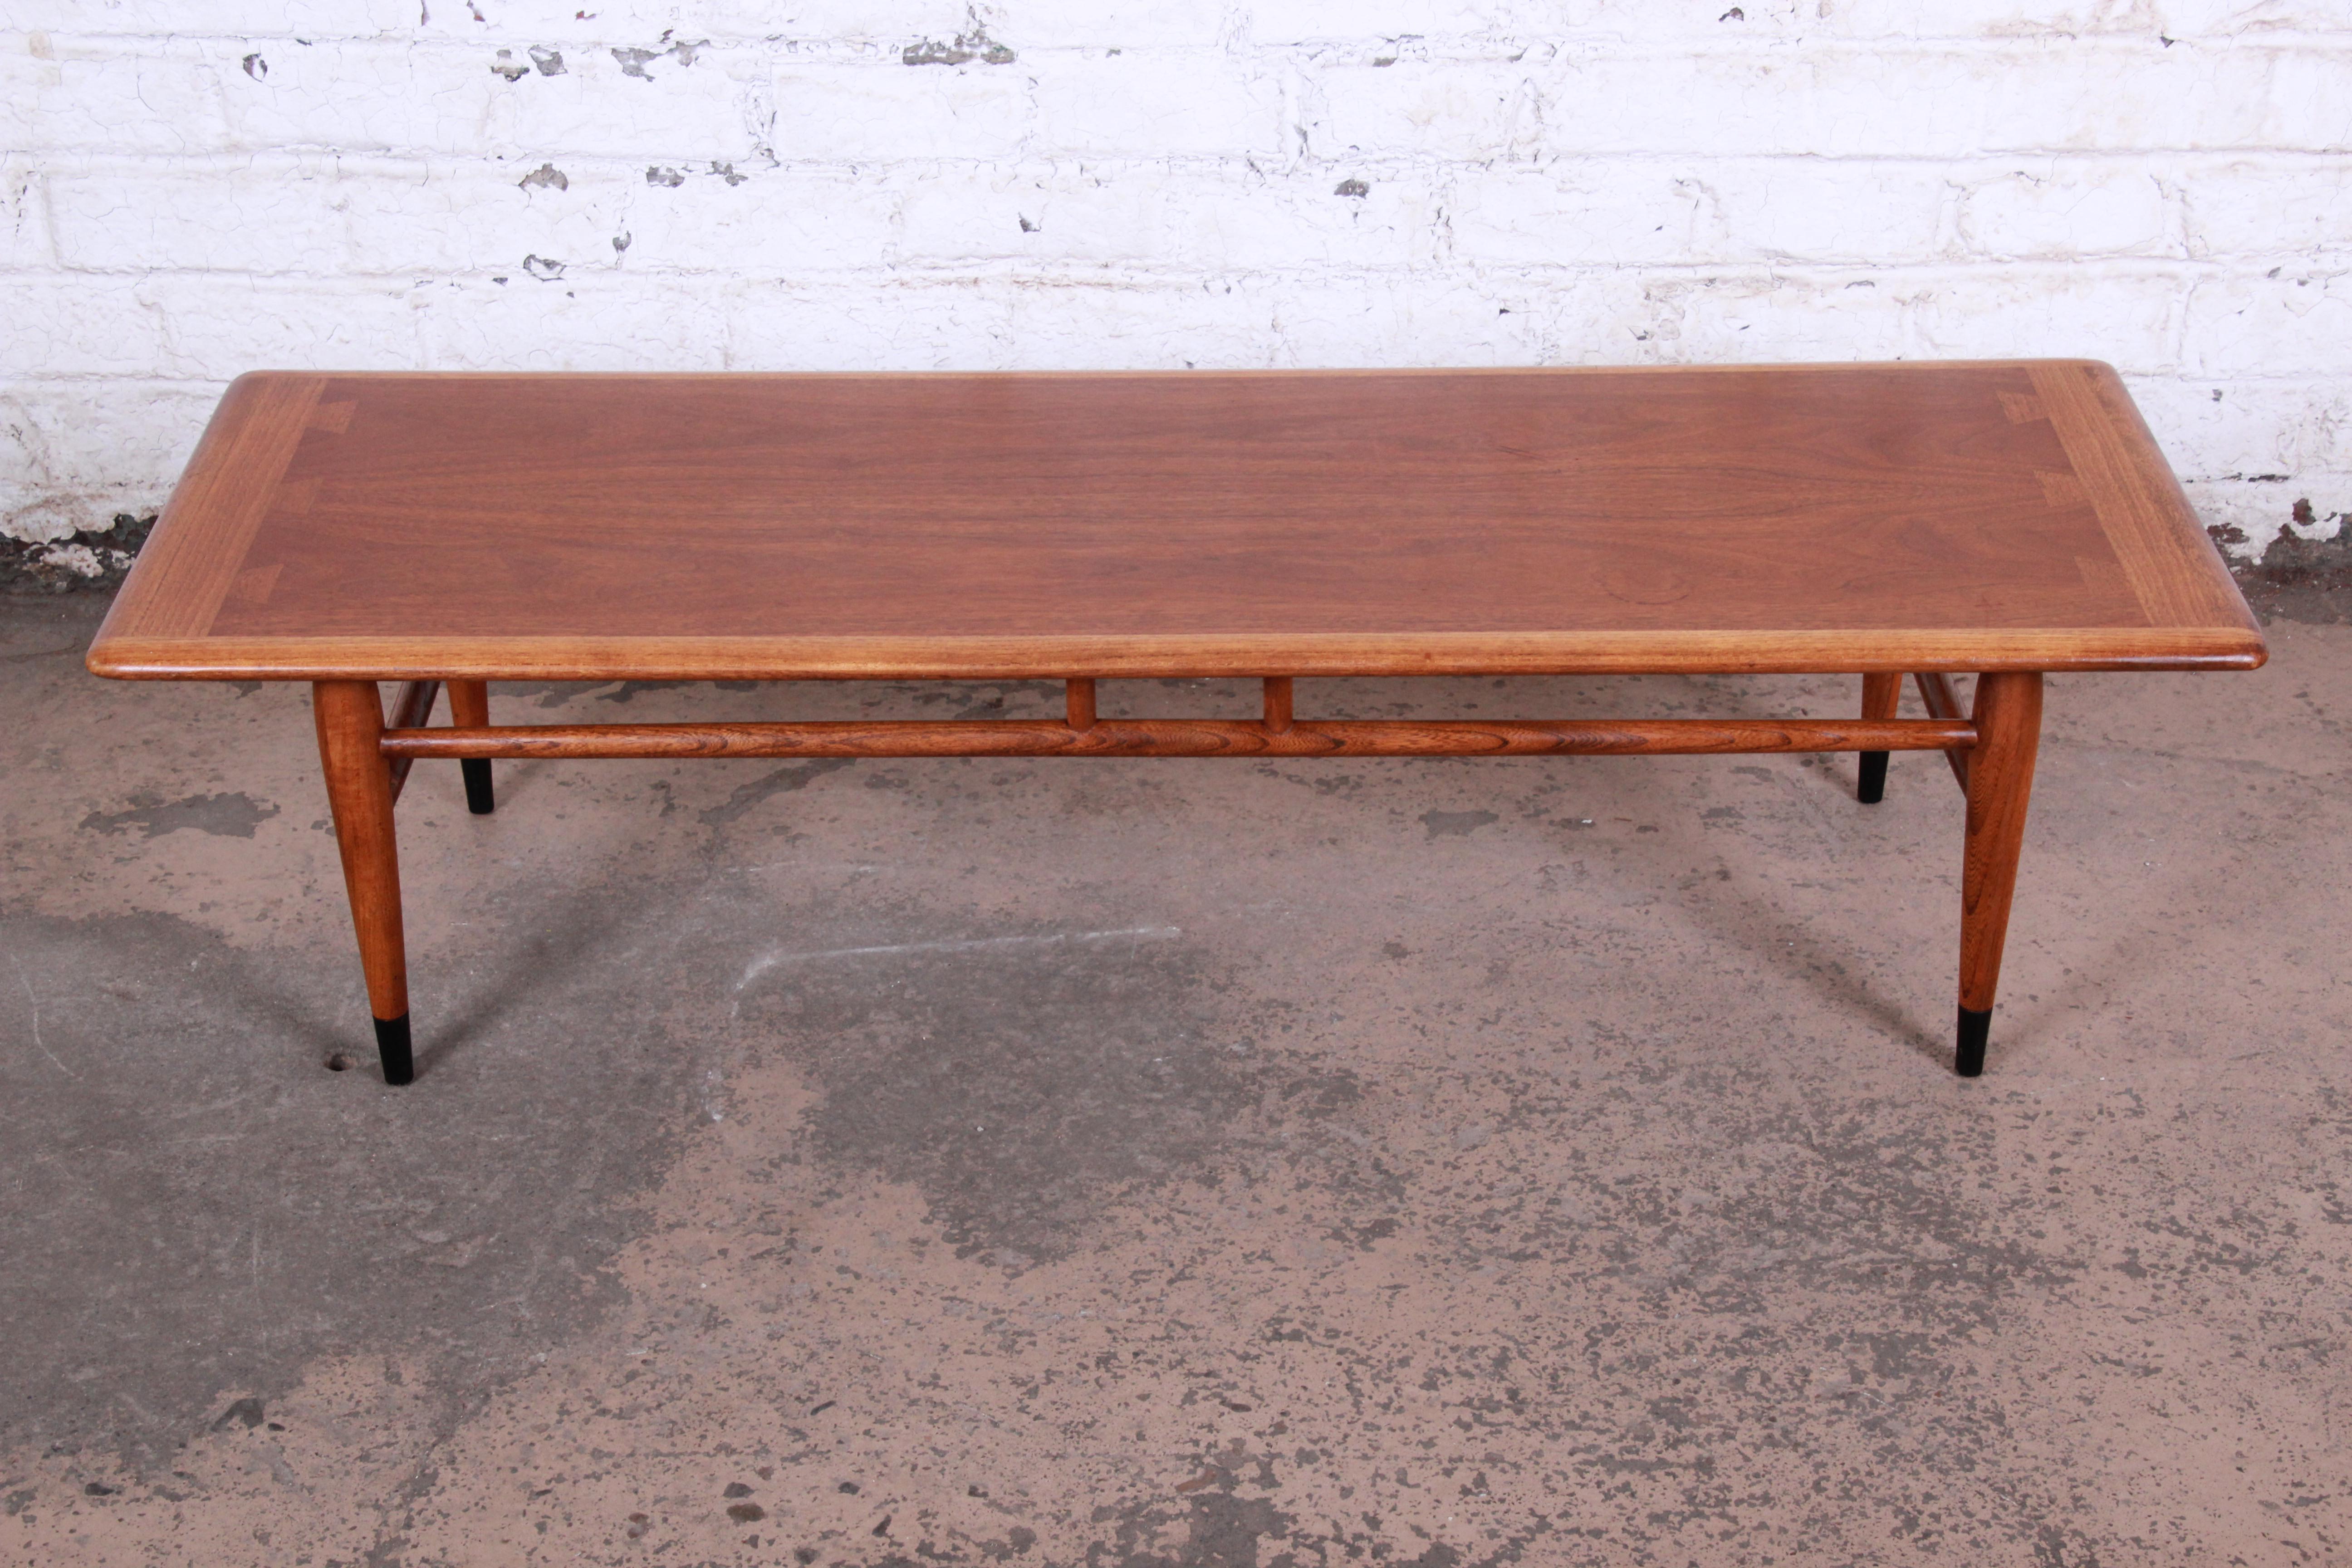 A gorgeous Mid-Century Modern coffee table from the Acclaim line by Lane. The table features beautiful walnut wood grain and unique dovetail joint design. It sits on tapered legs with a sleek stretcher connecting the legs and adding to the design.